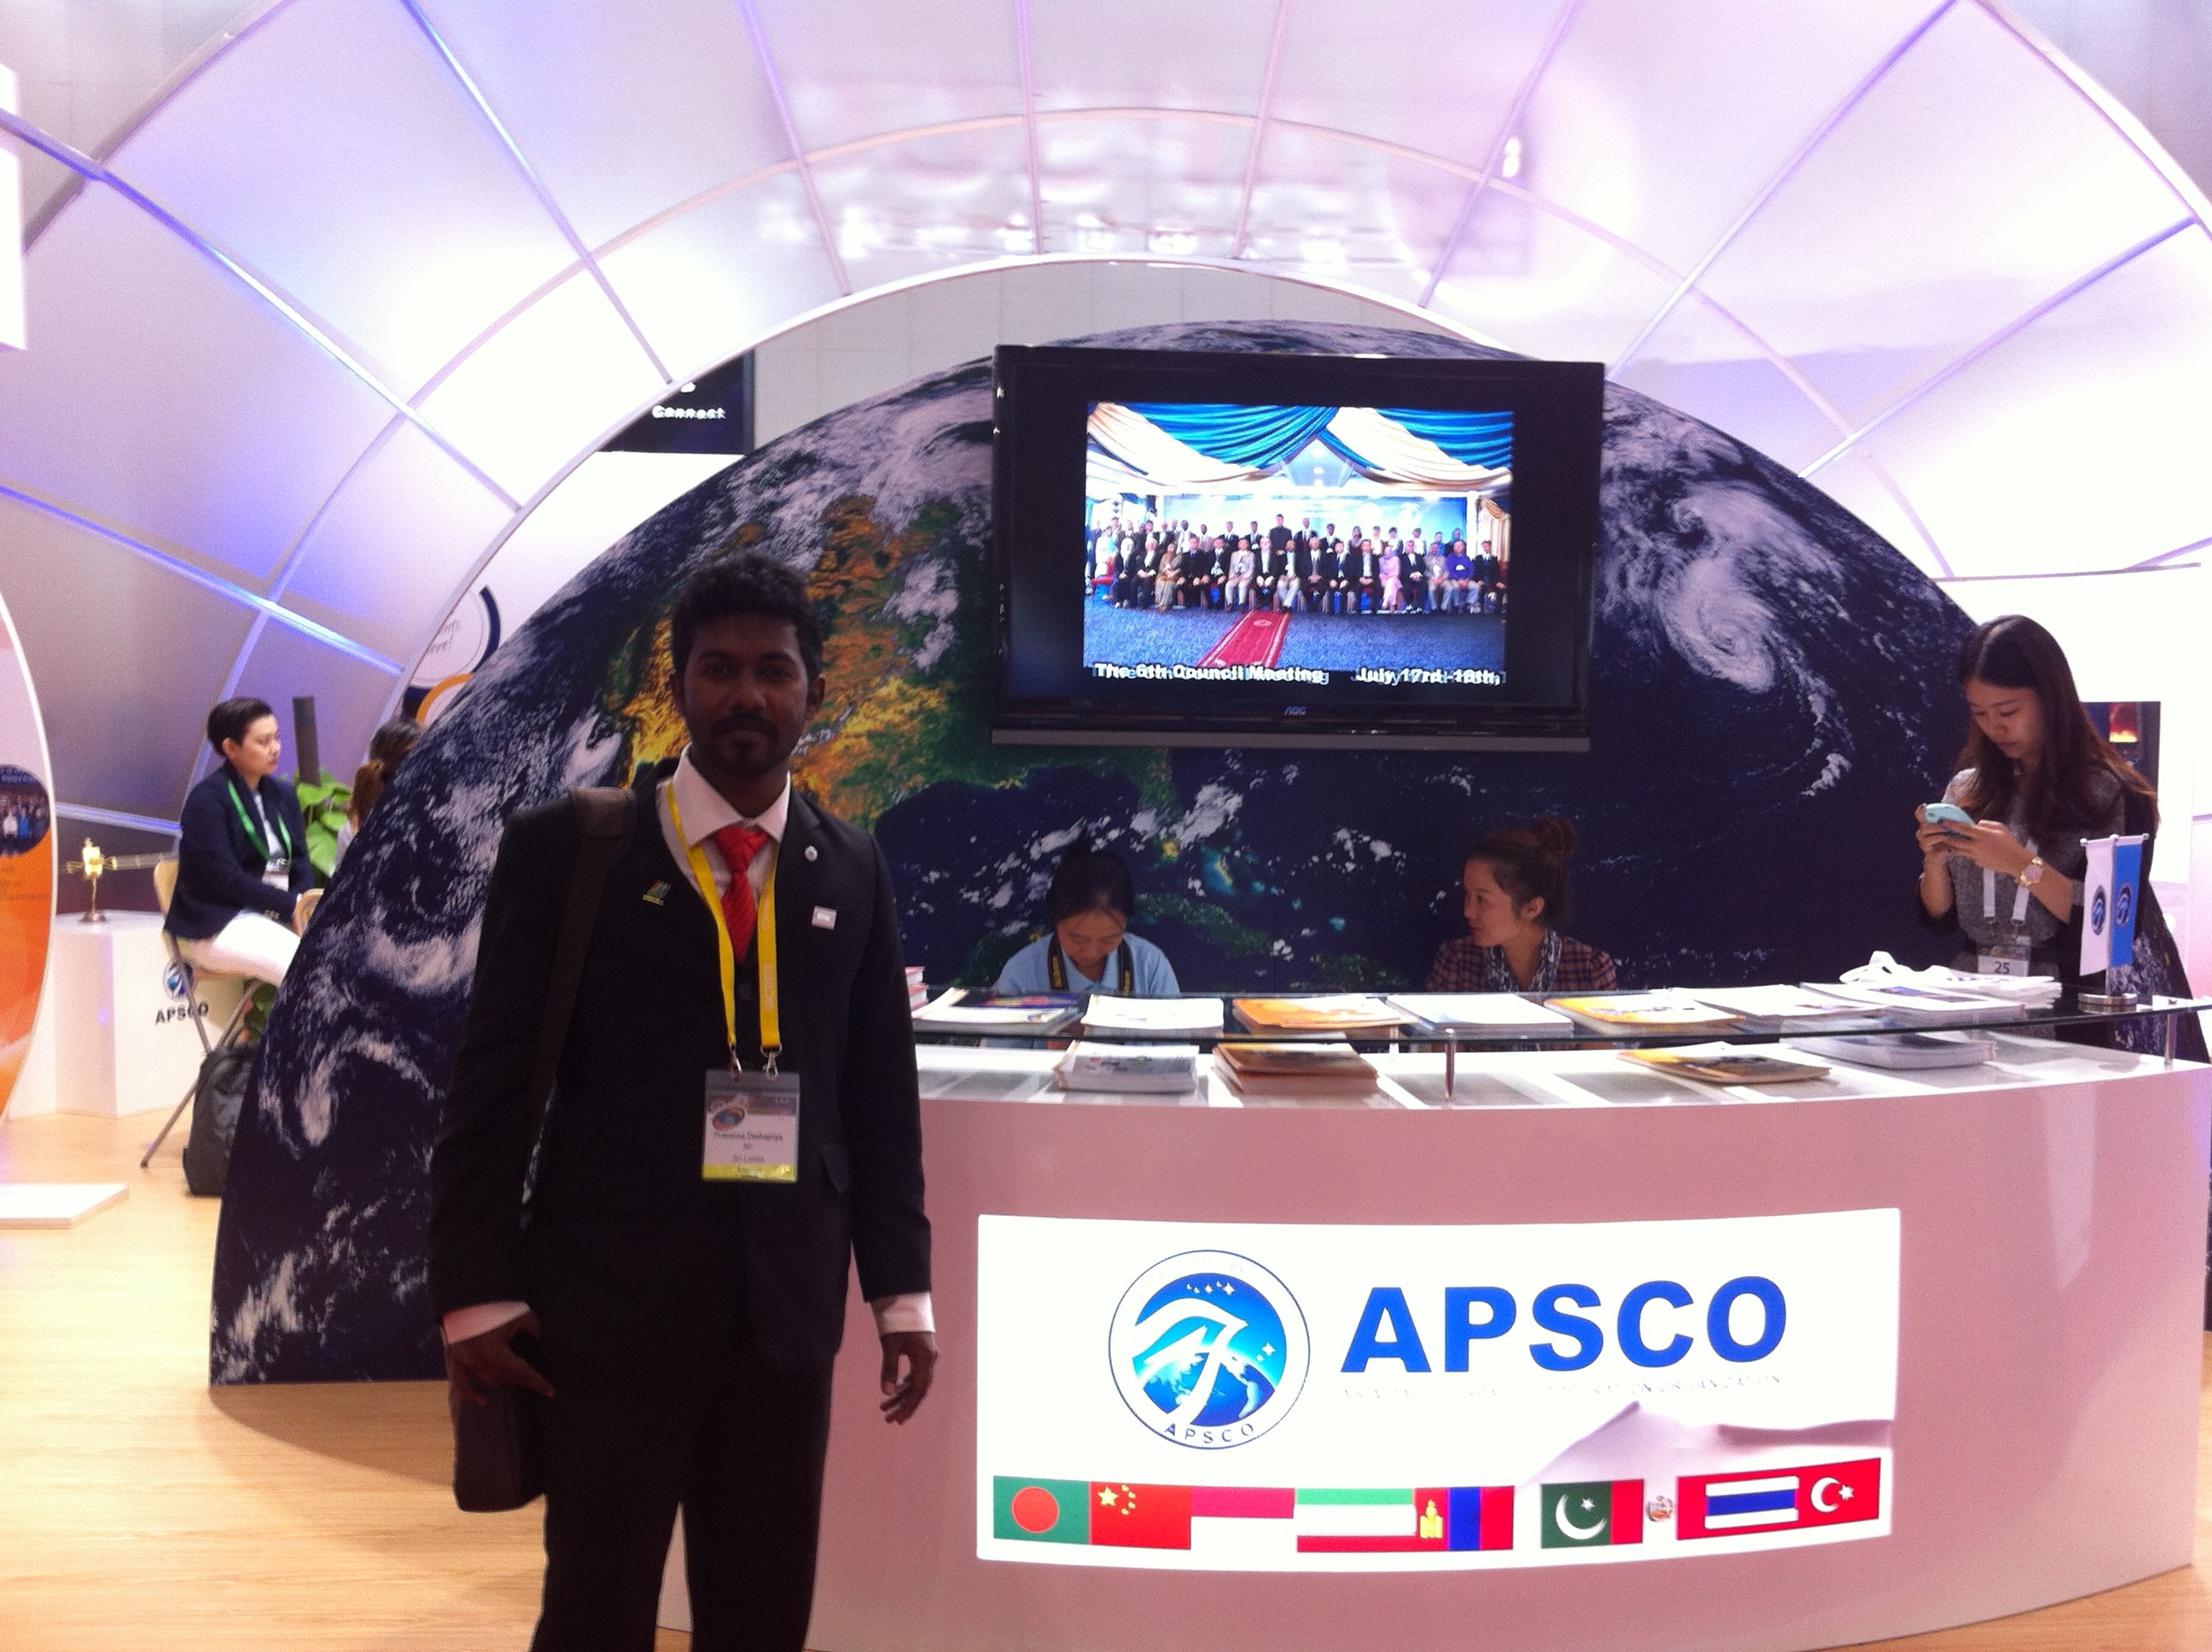 At APSCO booth